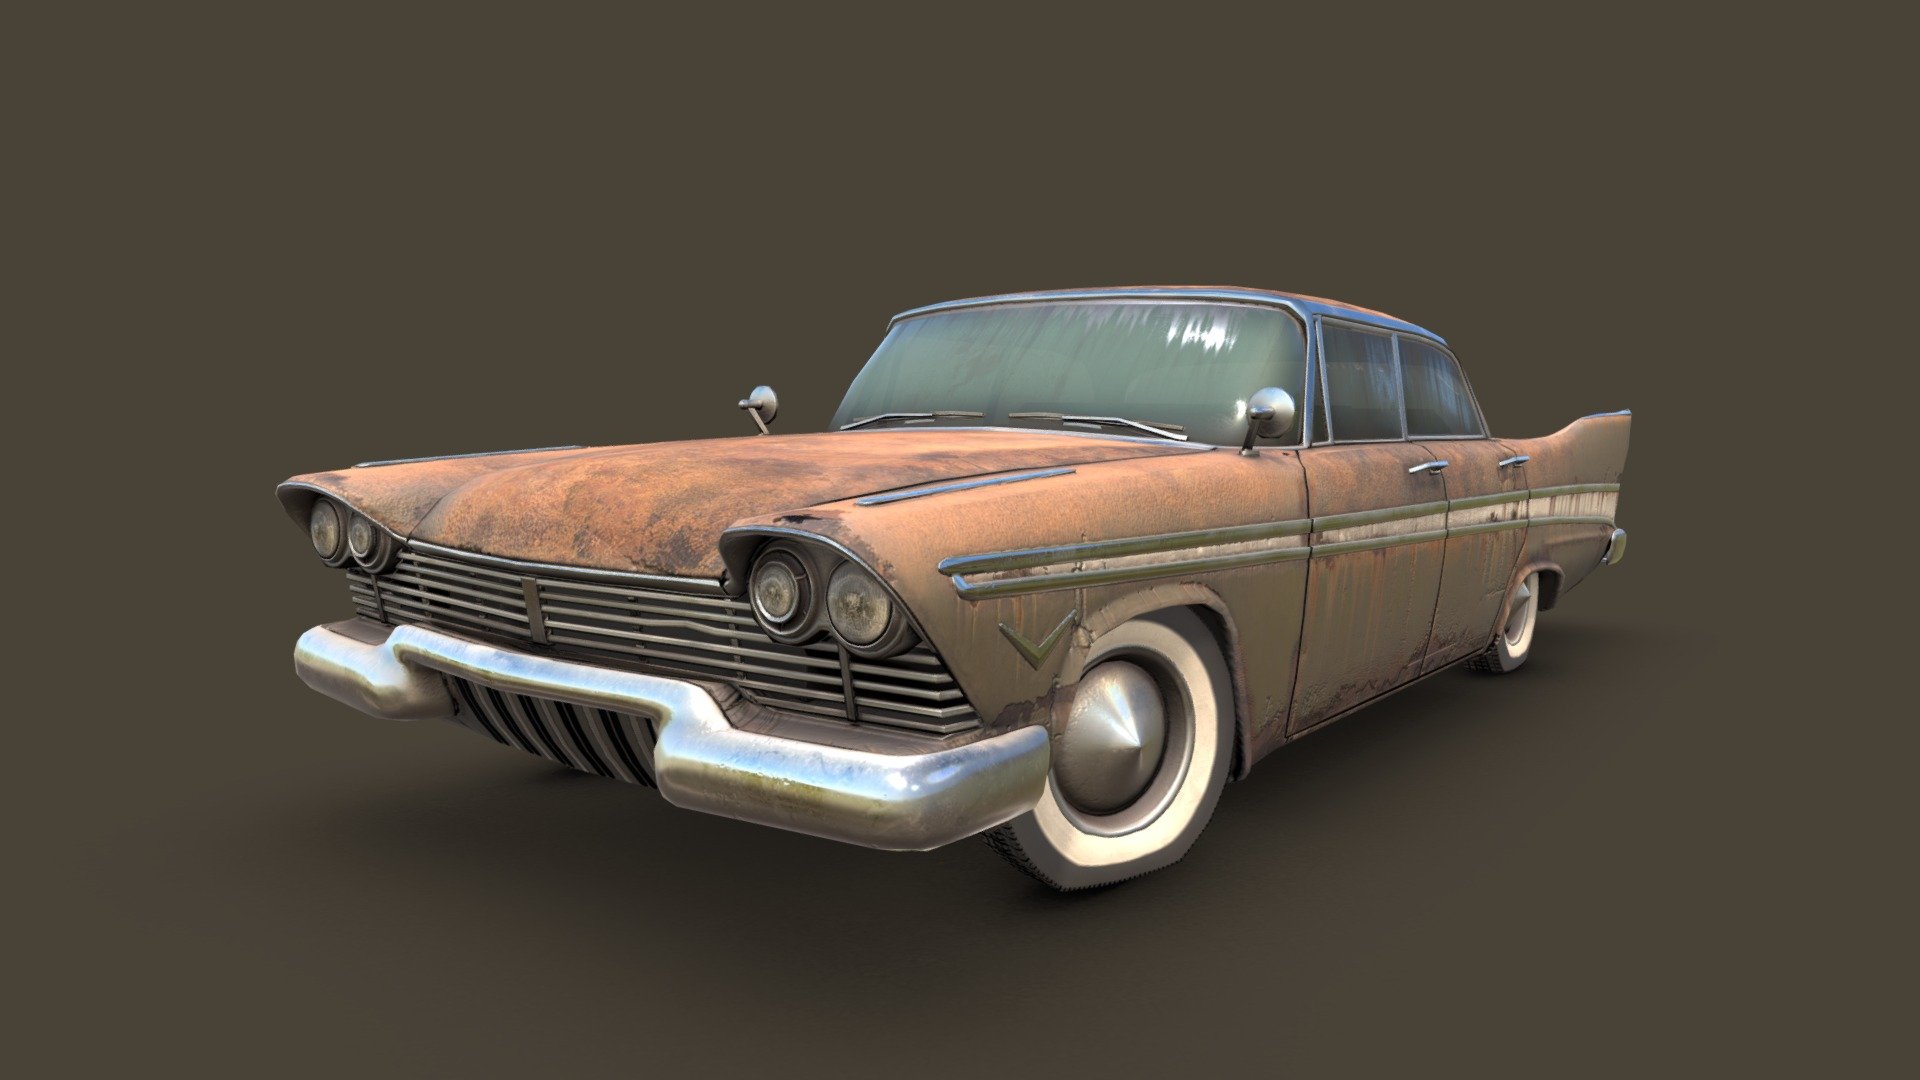 The rusty version of my 1957 Plymouth model. I've made a lot of geometry changes and re-did the UVs after someone gave me a very good critique.

Made in 3DSMax and Substance Painter 3d model